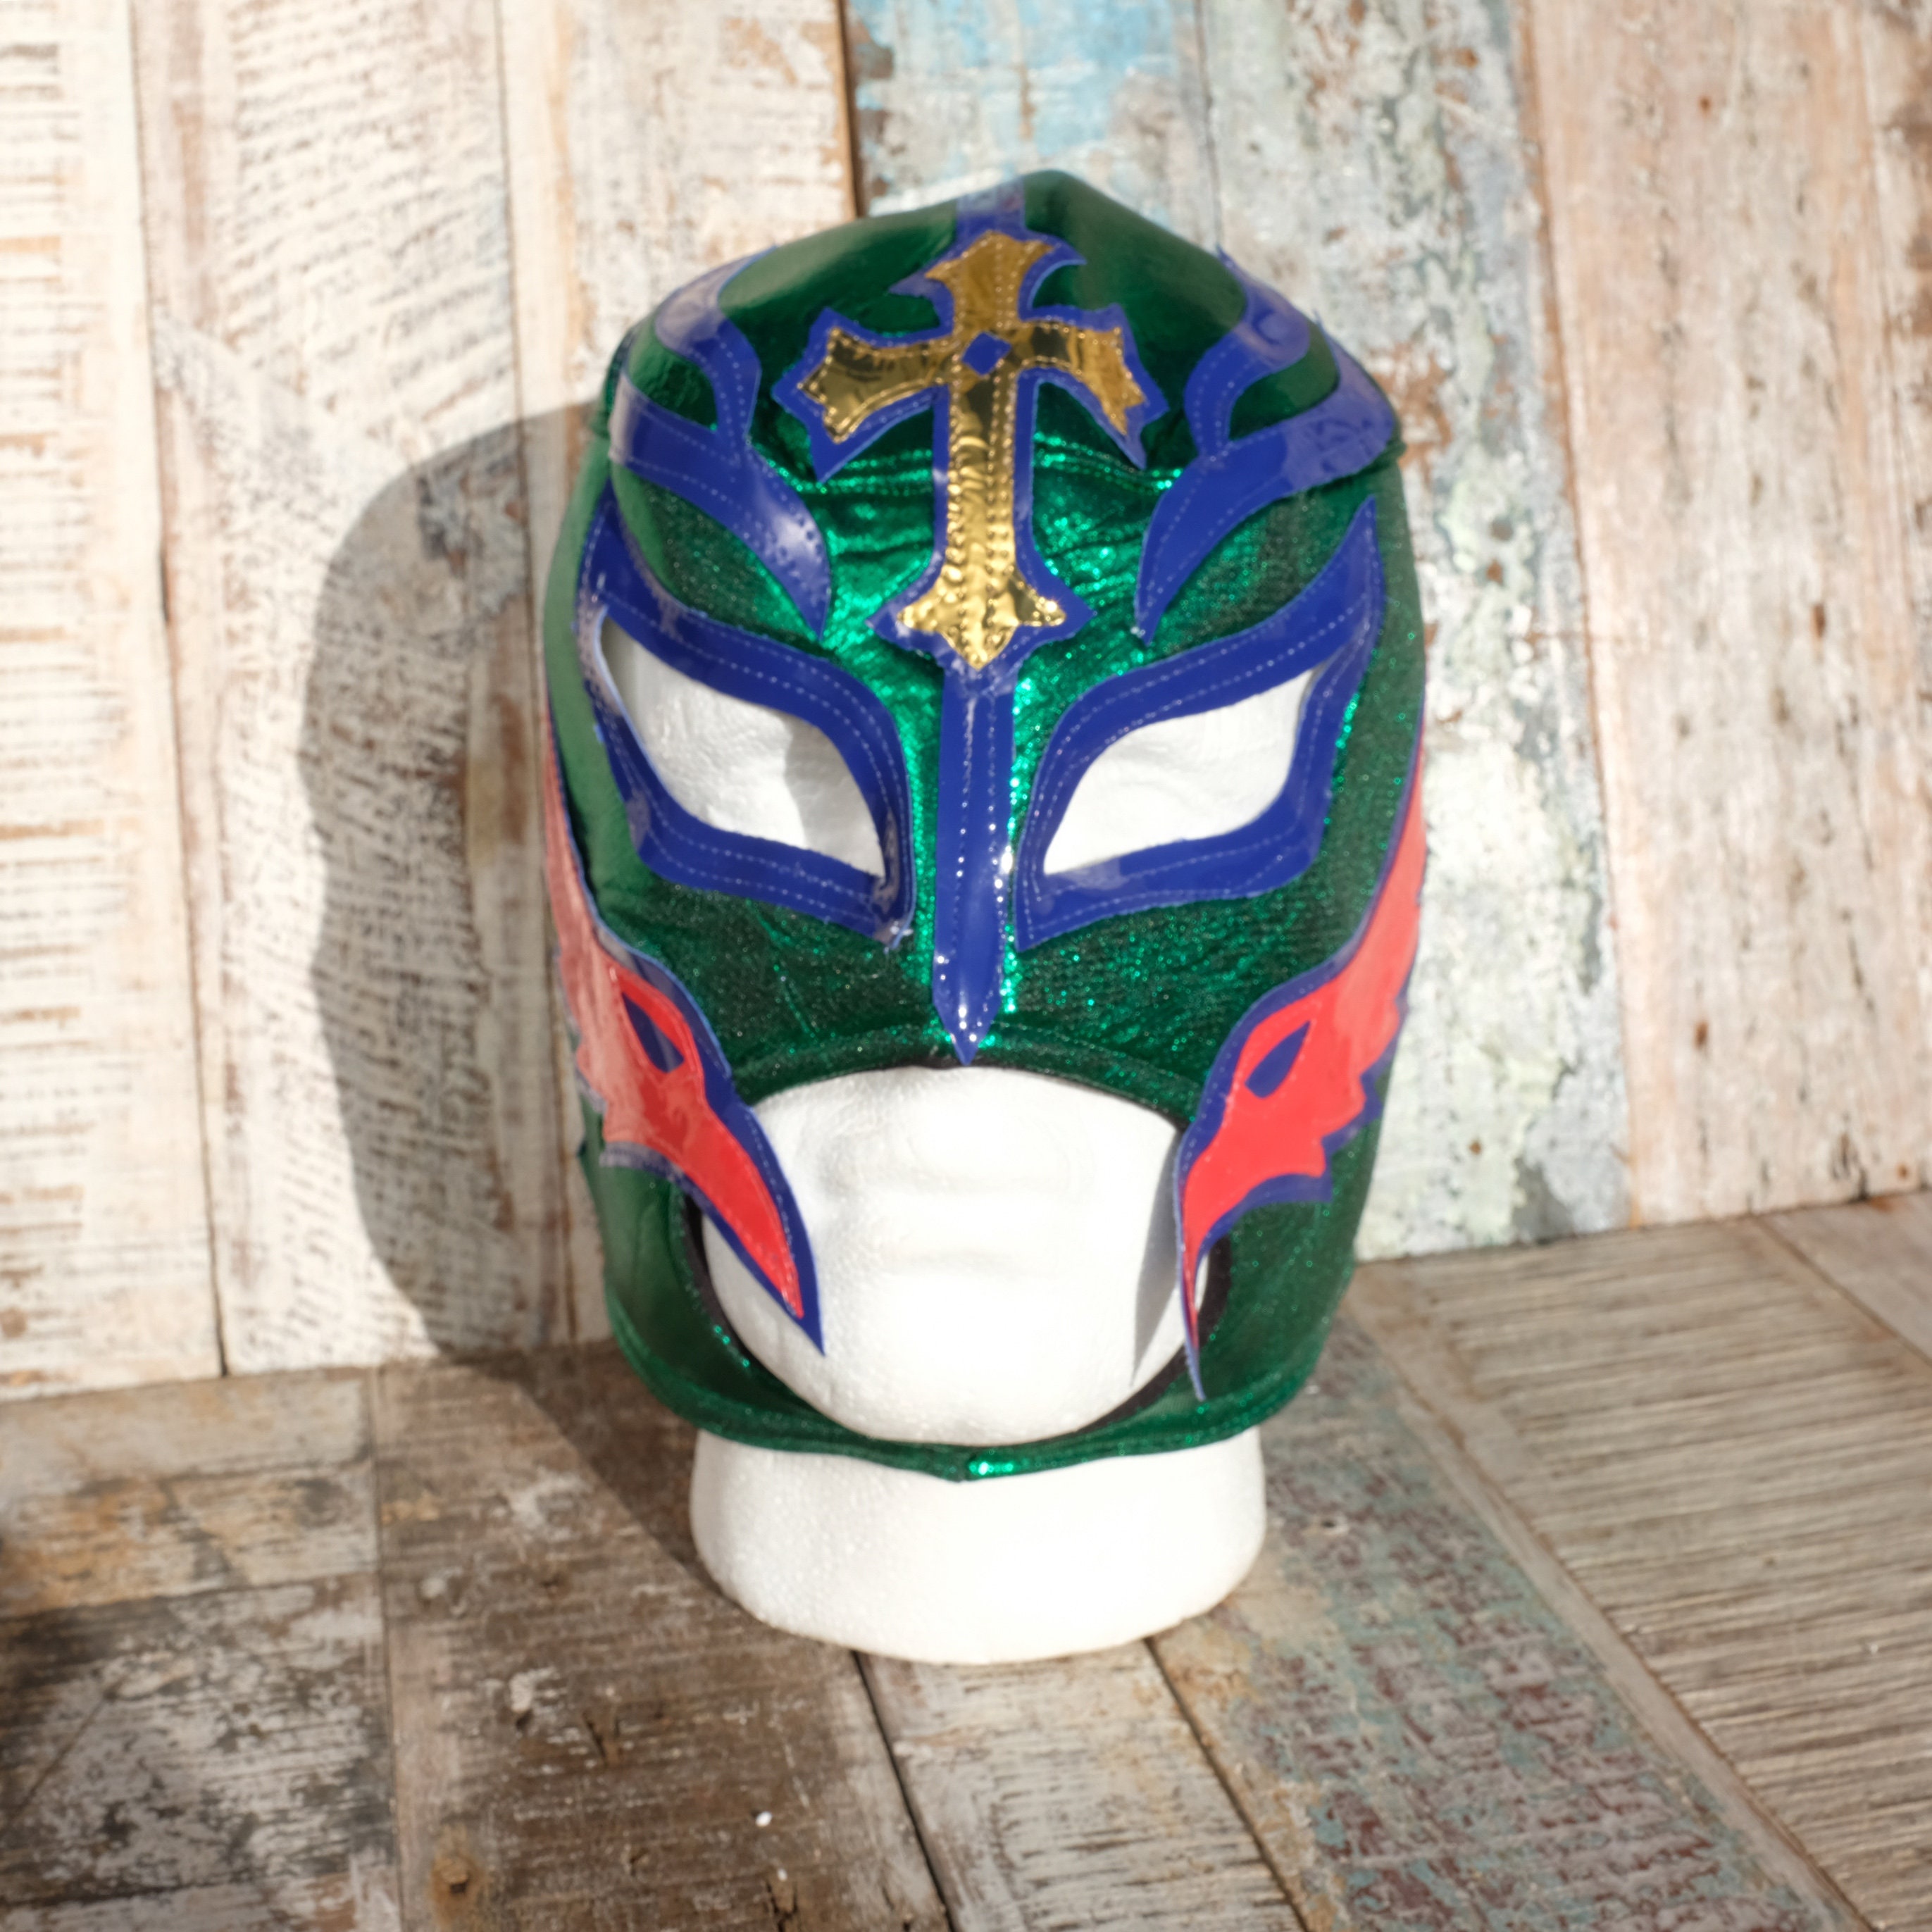 WWE Fancy Dress Up Costume Outfit Brand New Green Zip Up Mask Wrestling Rey Mysterio 